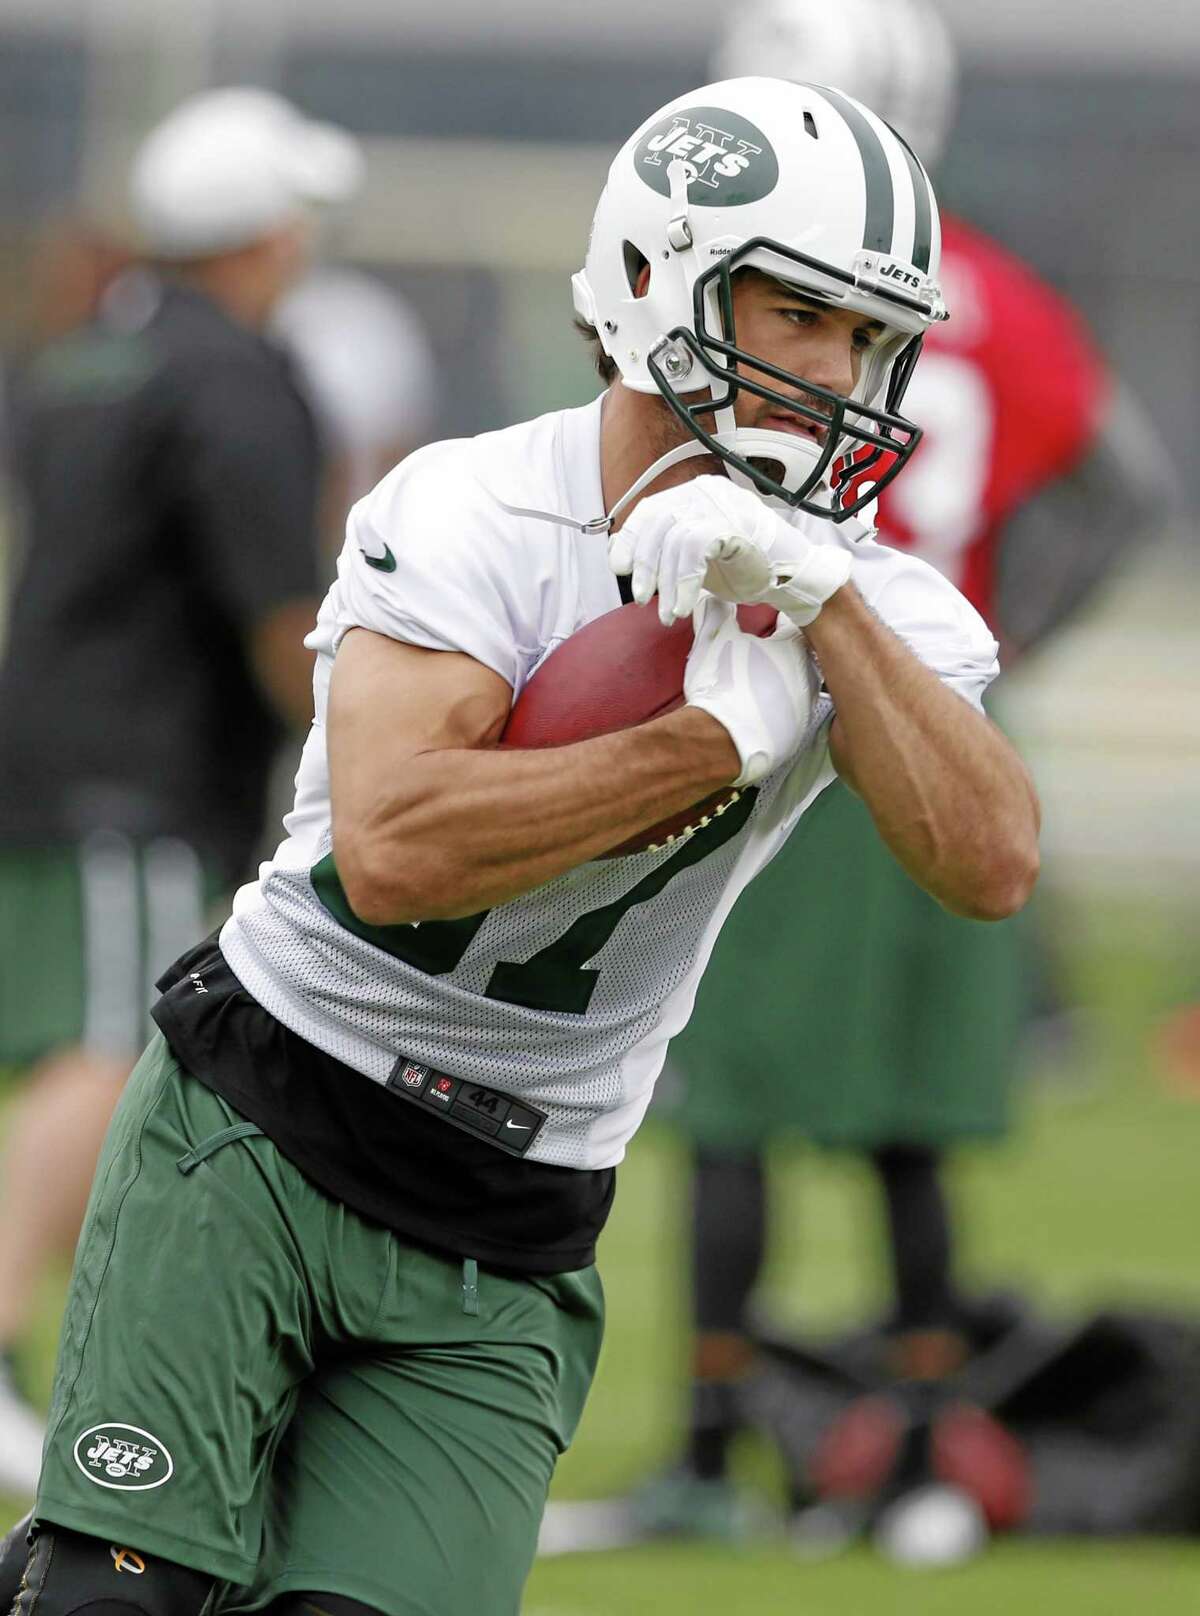 In this May 28 file photo, New York Jets wide receiver Eric Decker runs with the ball during an organized team activity in Florham Park, New Jersey.